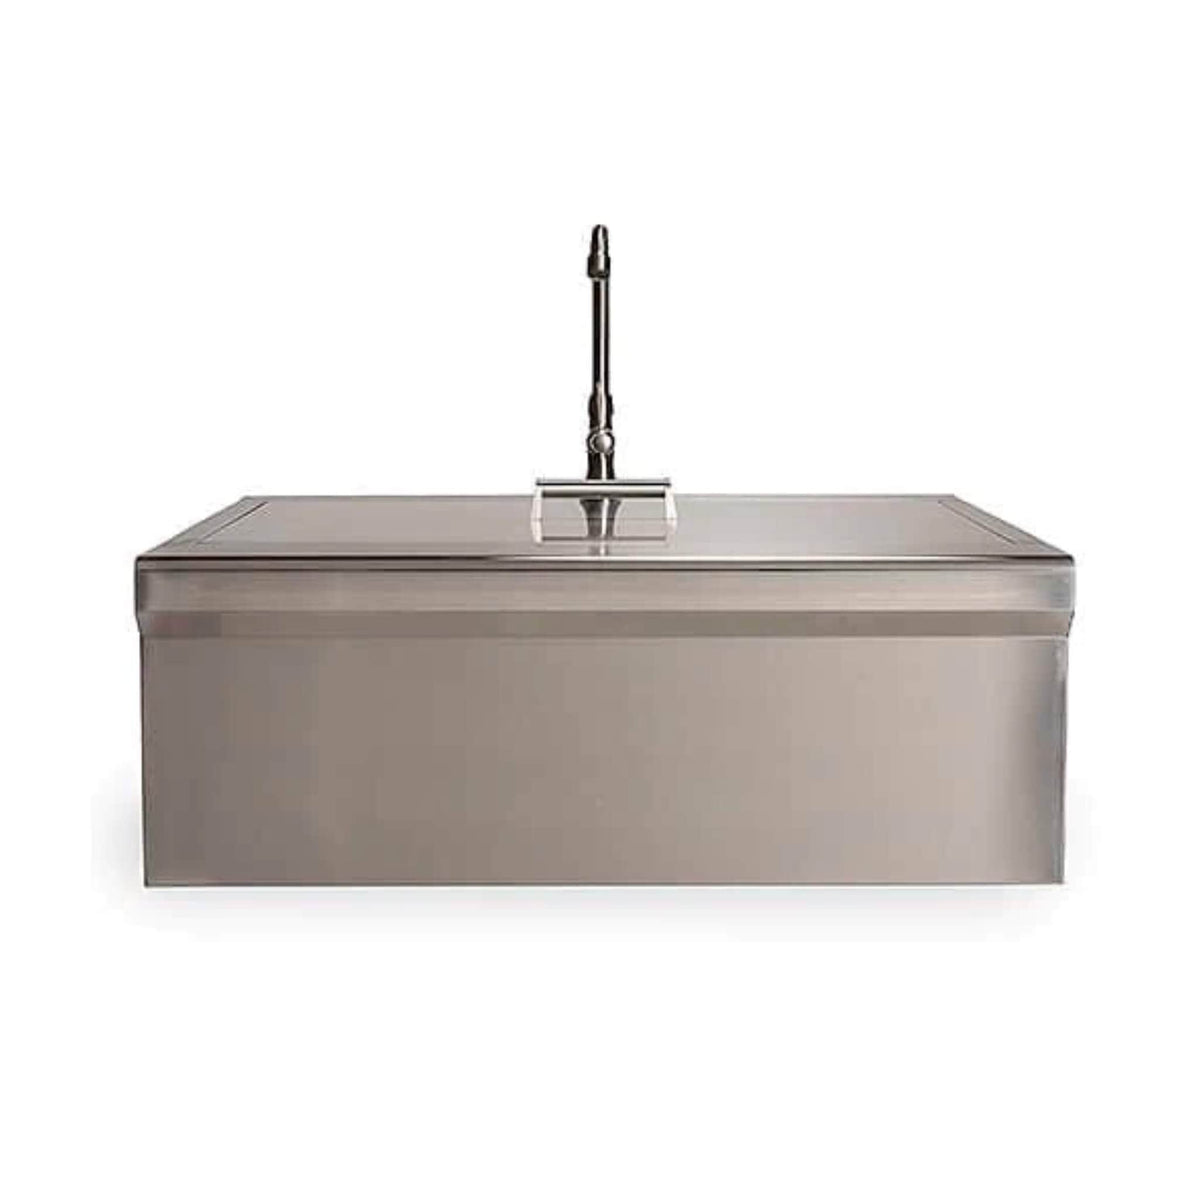 Coyote Stainless Steel Farmhouse Sink With Drain, Faucet, Strainer &amp; Cover